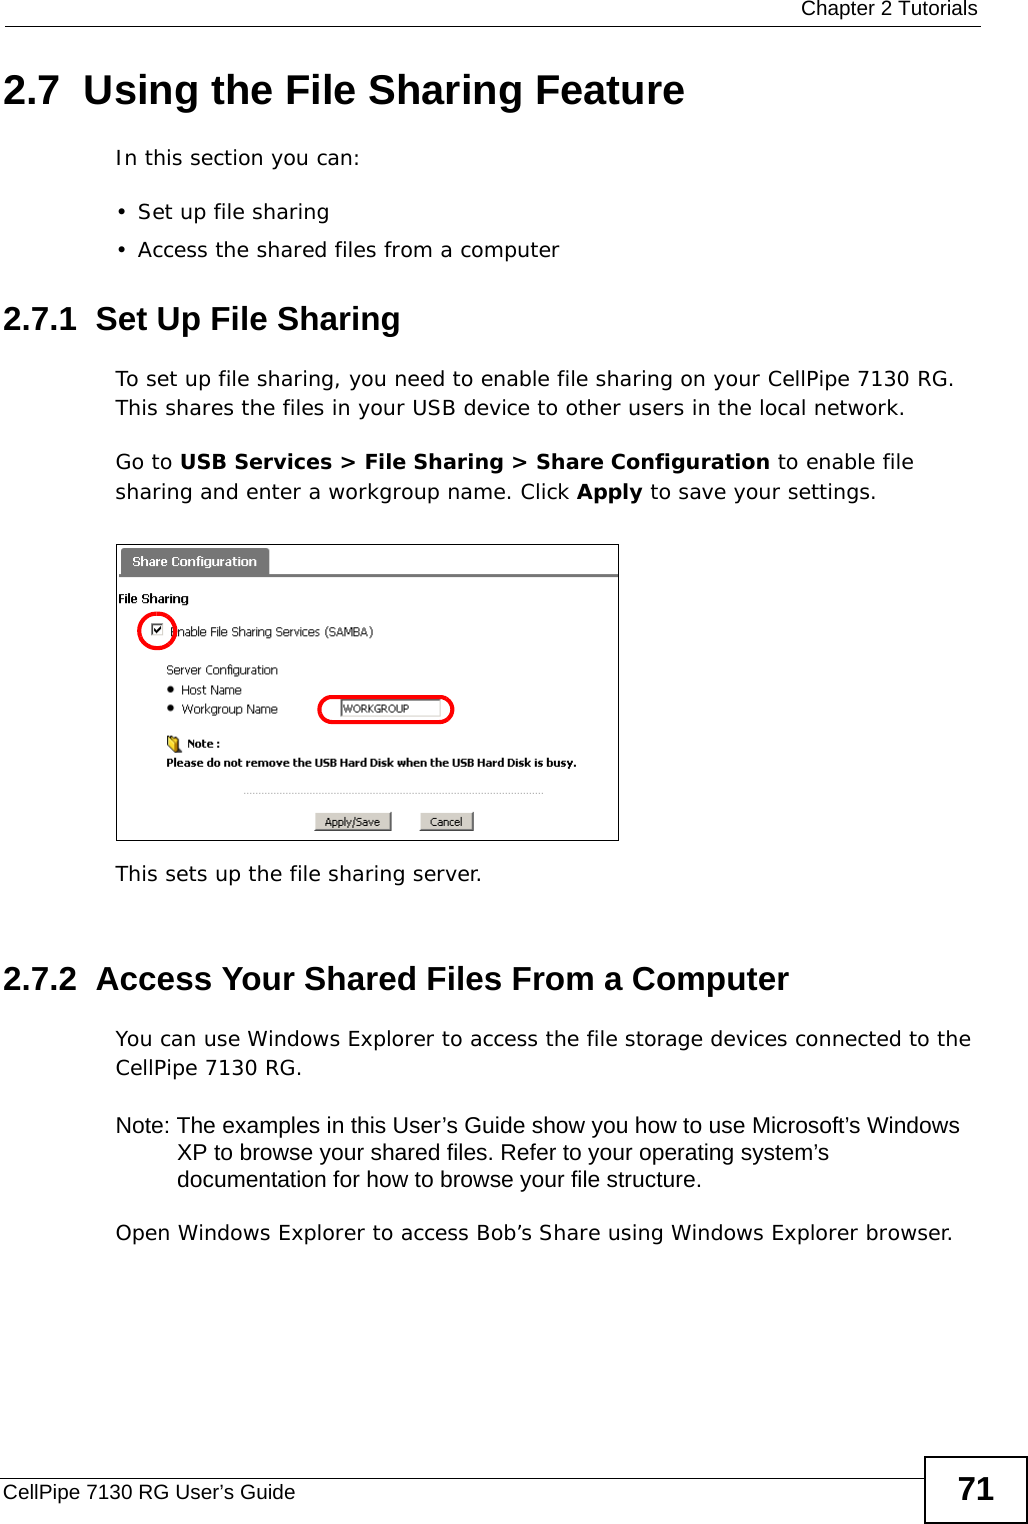  Chapter 2 TutorialsCellPipe 7130 RG User’s Guide 712.7  Using the File Sharing FeatureIn this section you can:• Set up file sharing• Access the shared files from a computer2.7.1  Set Up File SharingTo set up file sharing, you need to enable file sharing on your CellPipe 7130 RG. This shares the files in your USB device to other users in the local network.Go to USB Services &gt; File Sharing &gt; Share Configuration to enable file sharing and enter a workgroup name. Click Apply to save your settings. Tutorial: USB  Services &gt; File Sharing &gt; Share Configuration This sets up the file sharing server. Tutorial: USB  Services &gt; File Sharing &gt; Share Configuration (2) 2.7.2  Access Your Shared Files From a Computer You can use Windows Explorer to access the file storage devices connected to the CellPipe 7130 RG.Note: The examples in this User’s Guide show you how to use Microsoft’s Windows XP to browse your shared files. Refer to your operating system’s documentation for how to browse your file structure. Open Windows Explorer to access Bob’s Share using Windows Explorer browser.